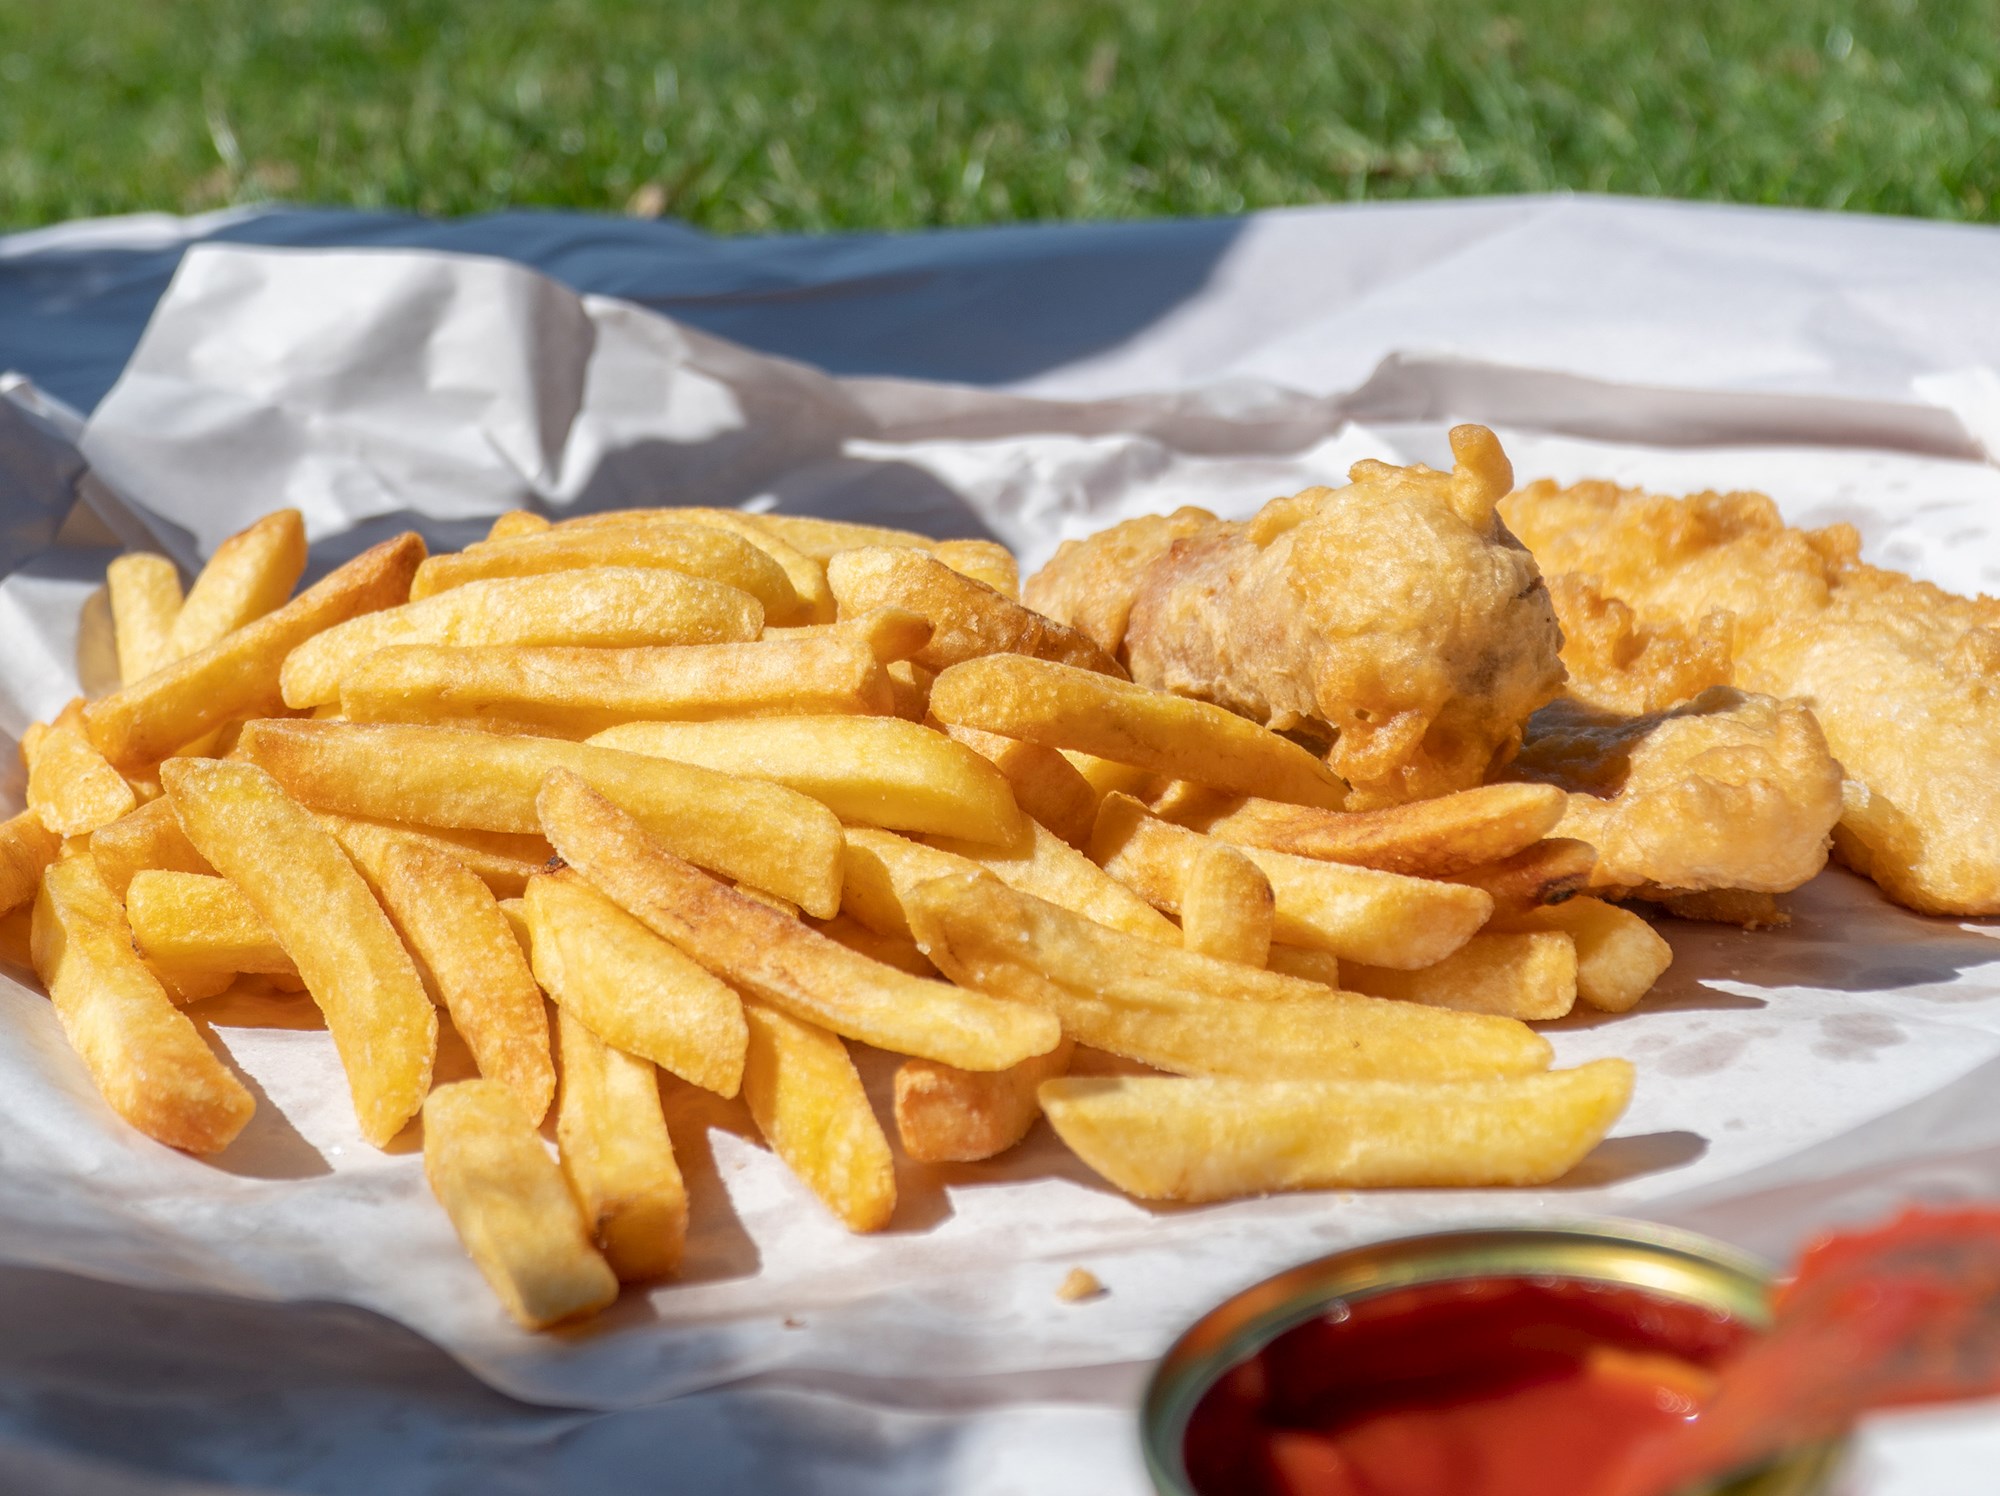 Where to Eat the Best New Zealand Fish And Chips in the